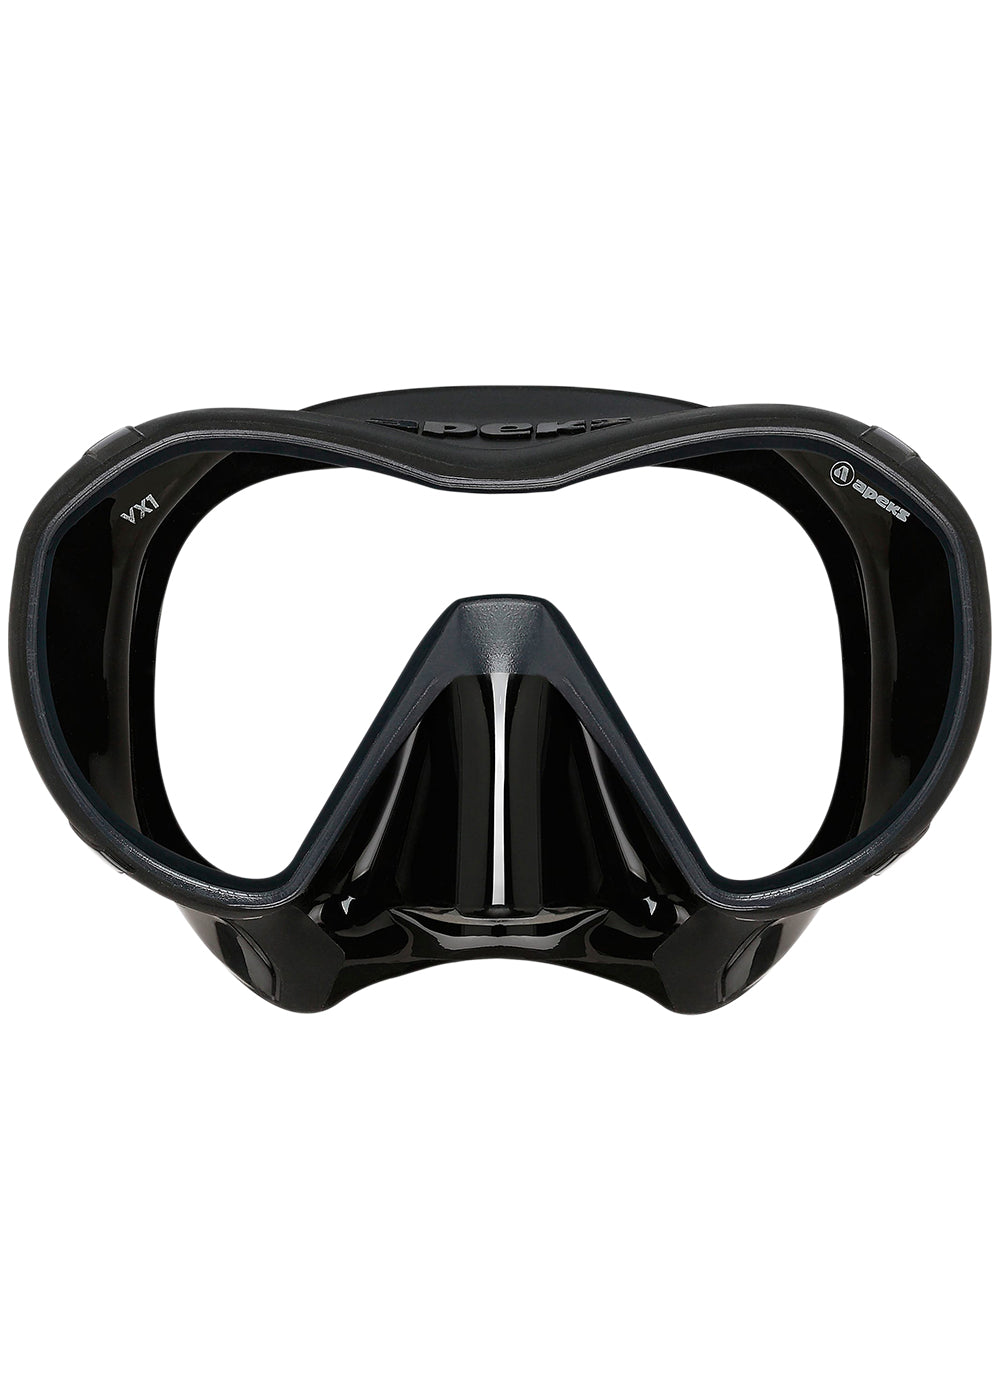 Apeks VX1 Mask With Ultraclear Lens